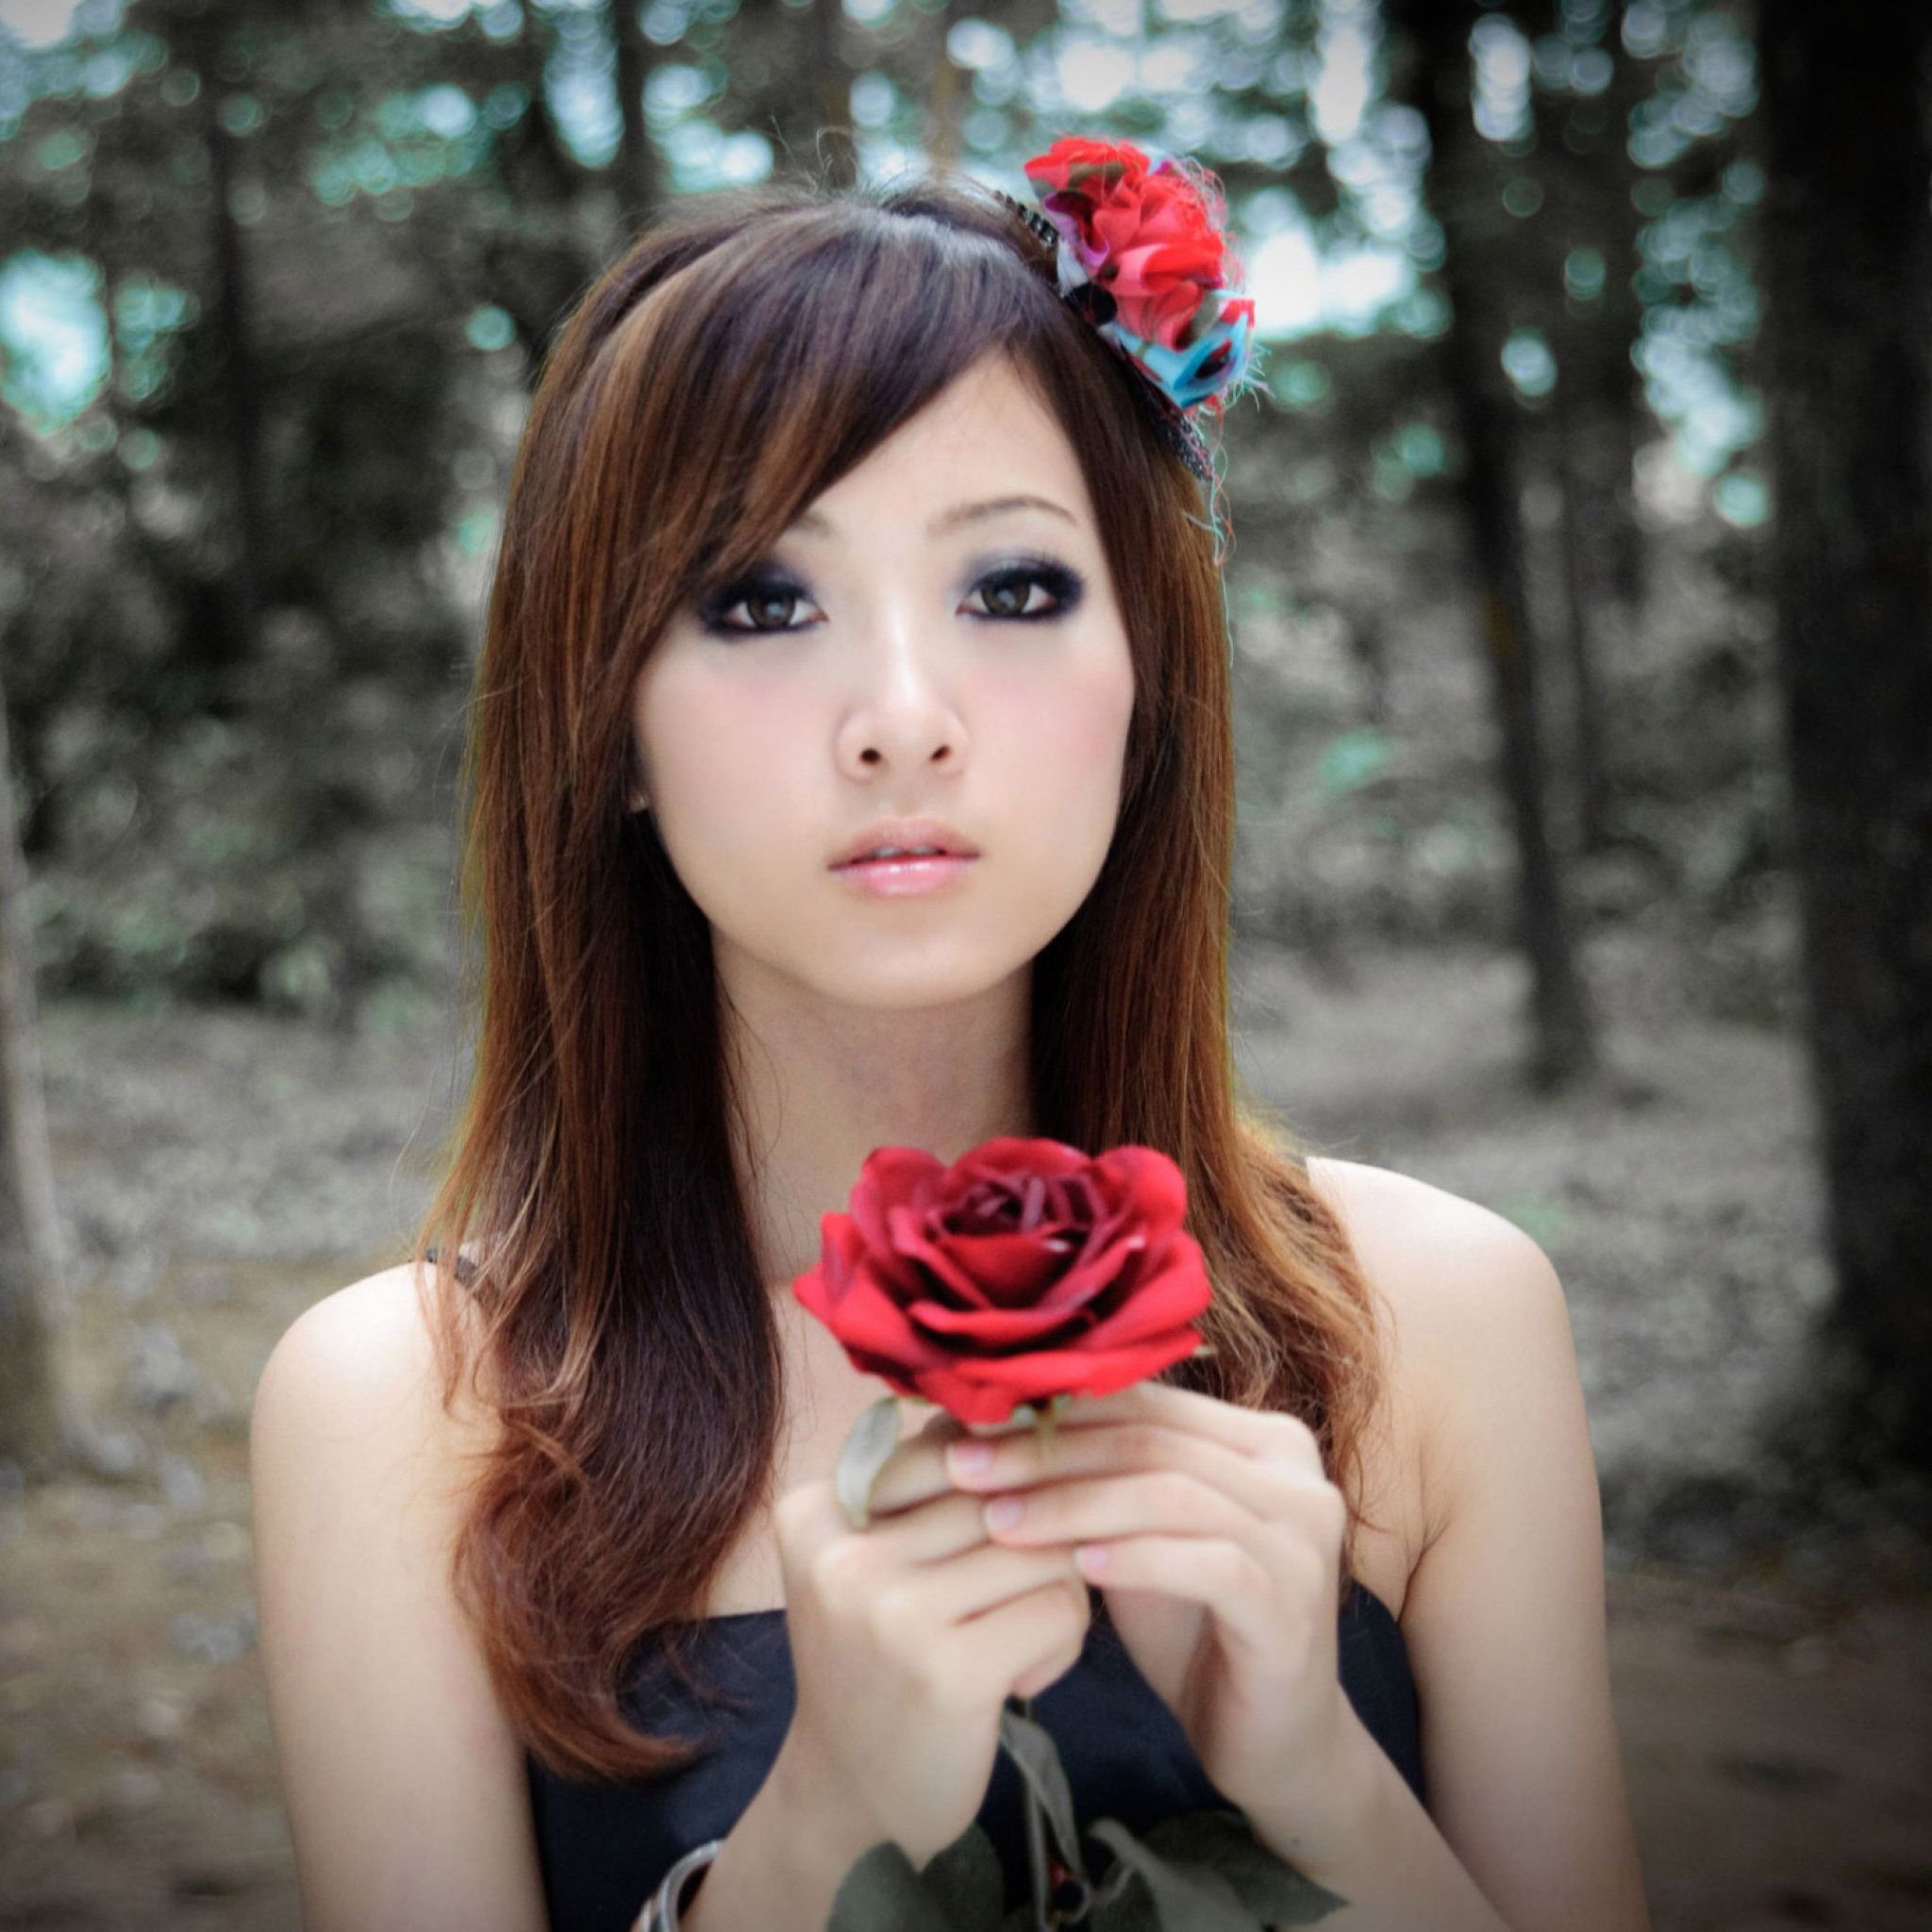 Das Asian Girl With Red Rose Wallpaper 2048x2048